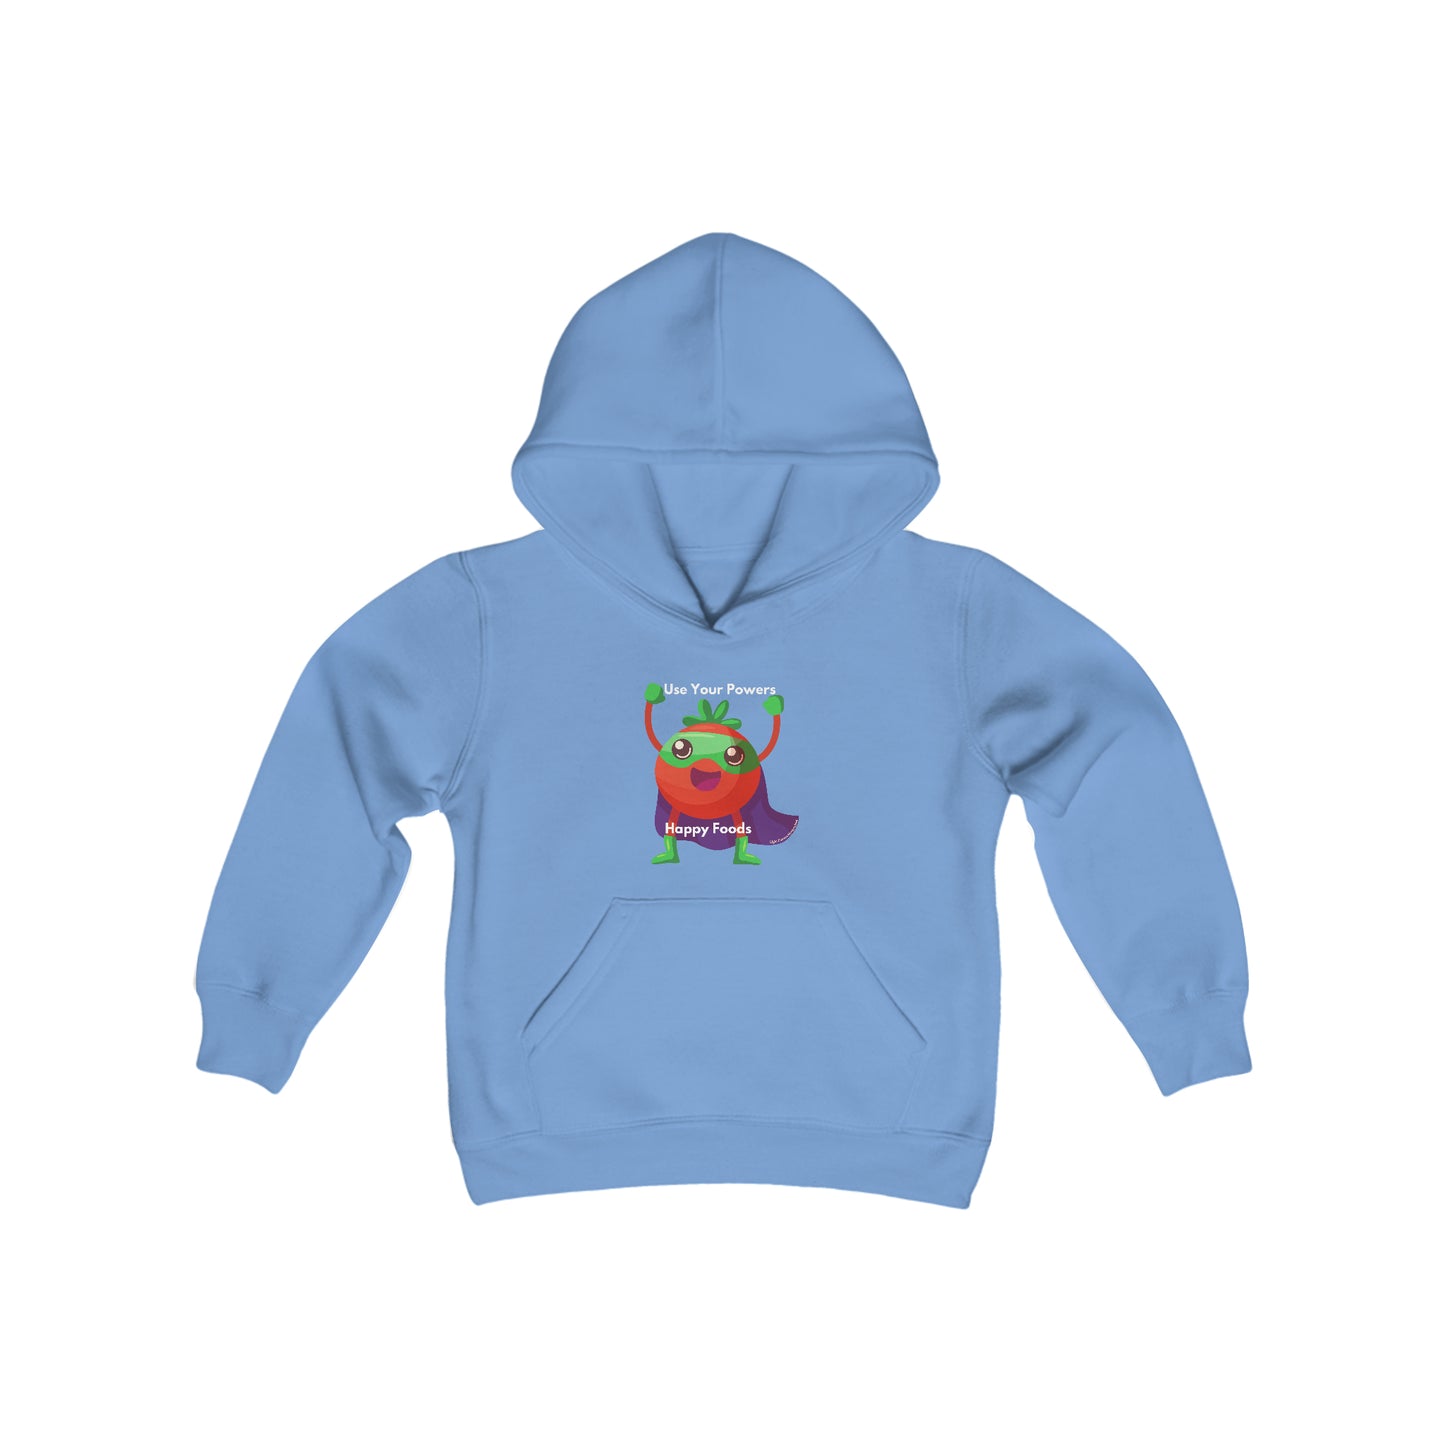 Light Passers Marketplace Tomato Power Happy Food Youth Hooded Sweatshirt Nutrition, Mental Health, Simple Messages